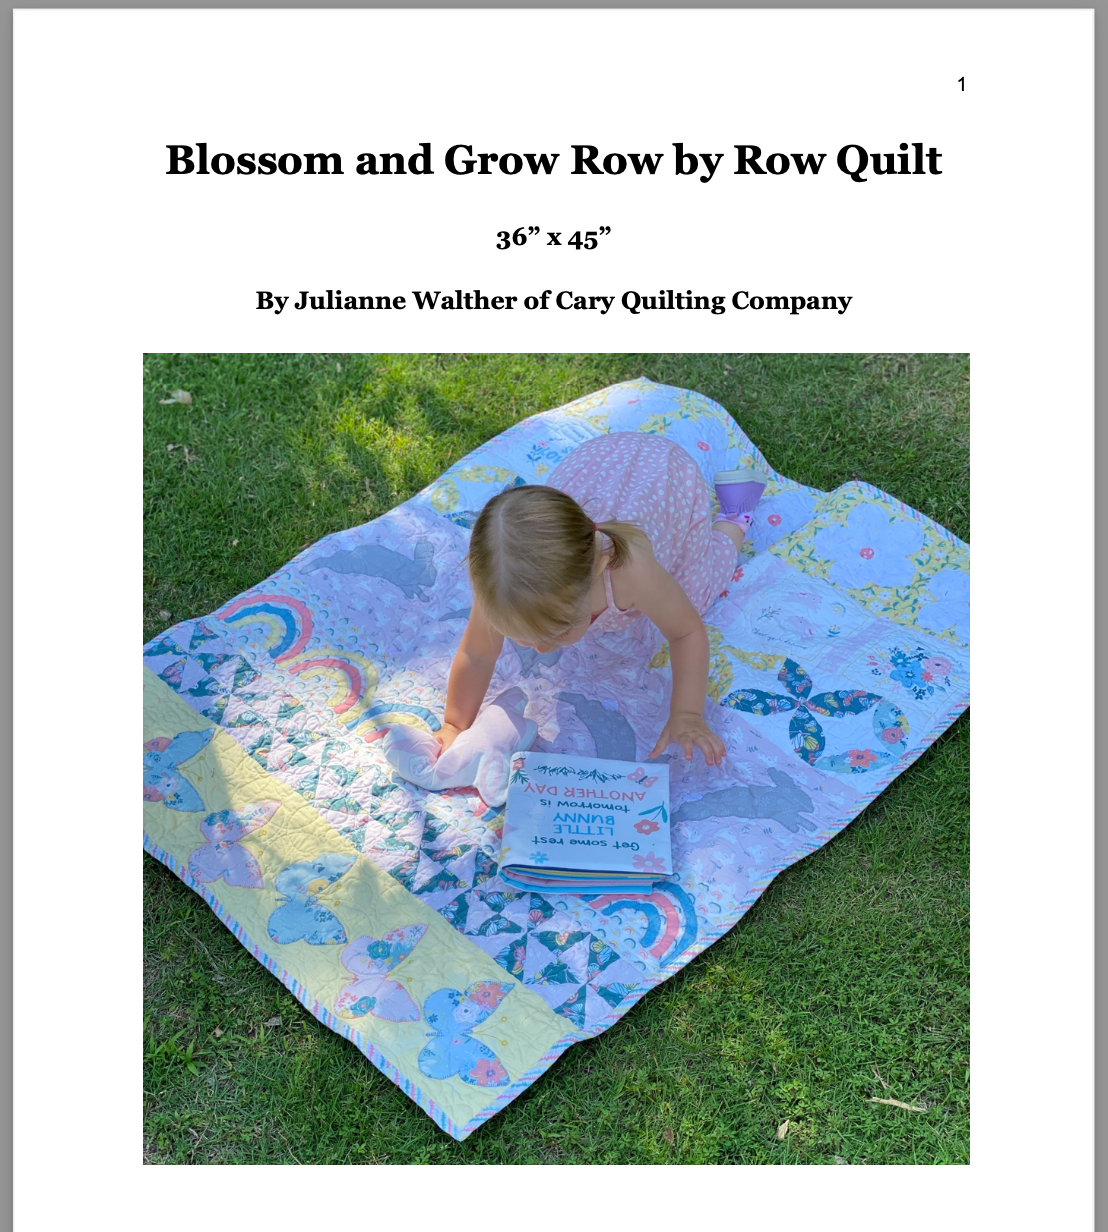 Blossom and Grow Row by Row Quilt Pattern